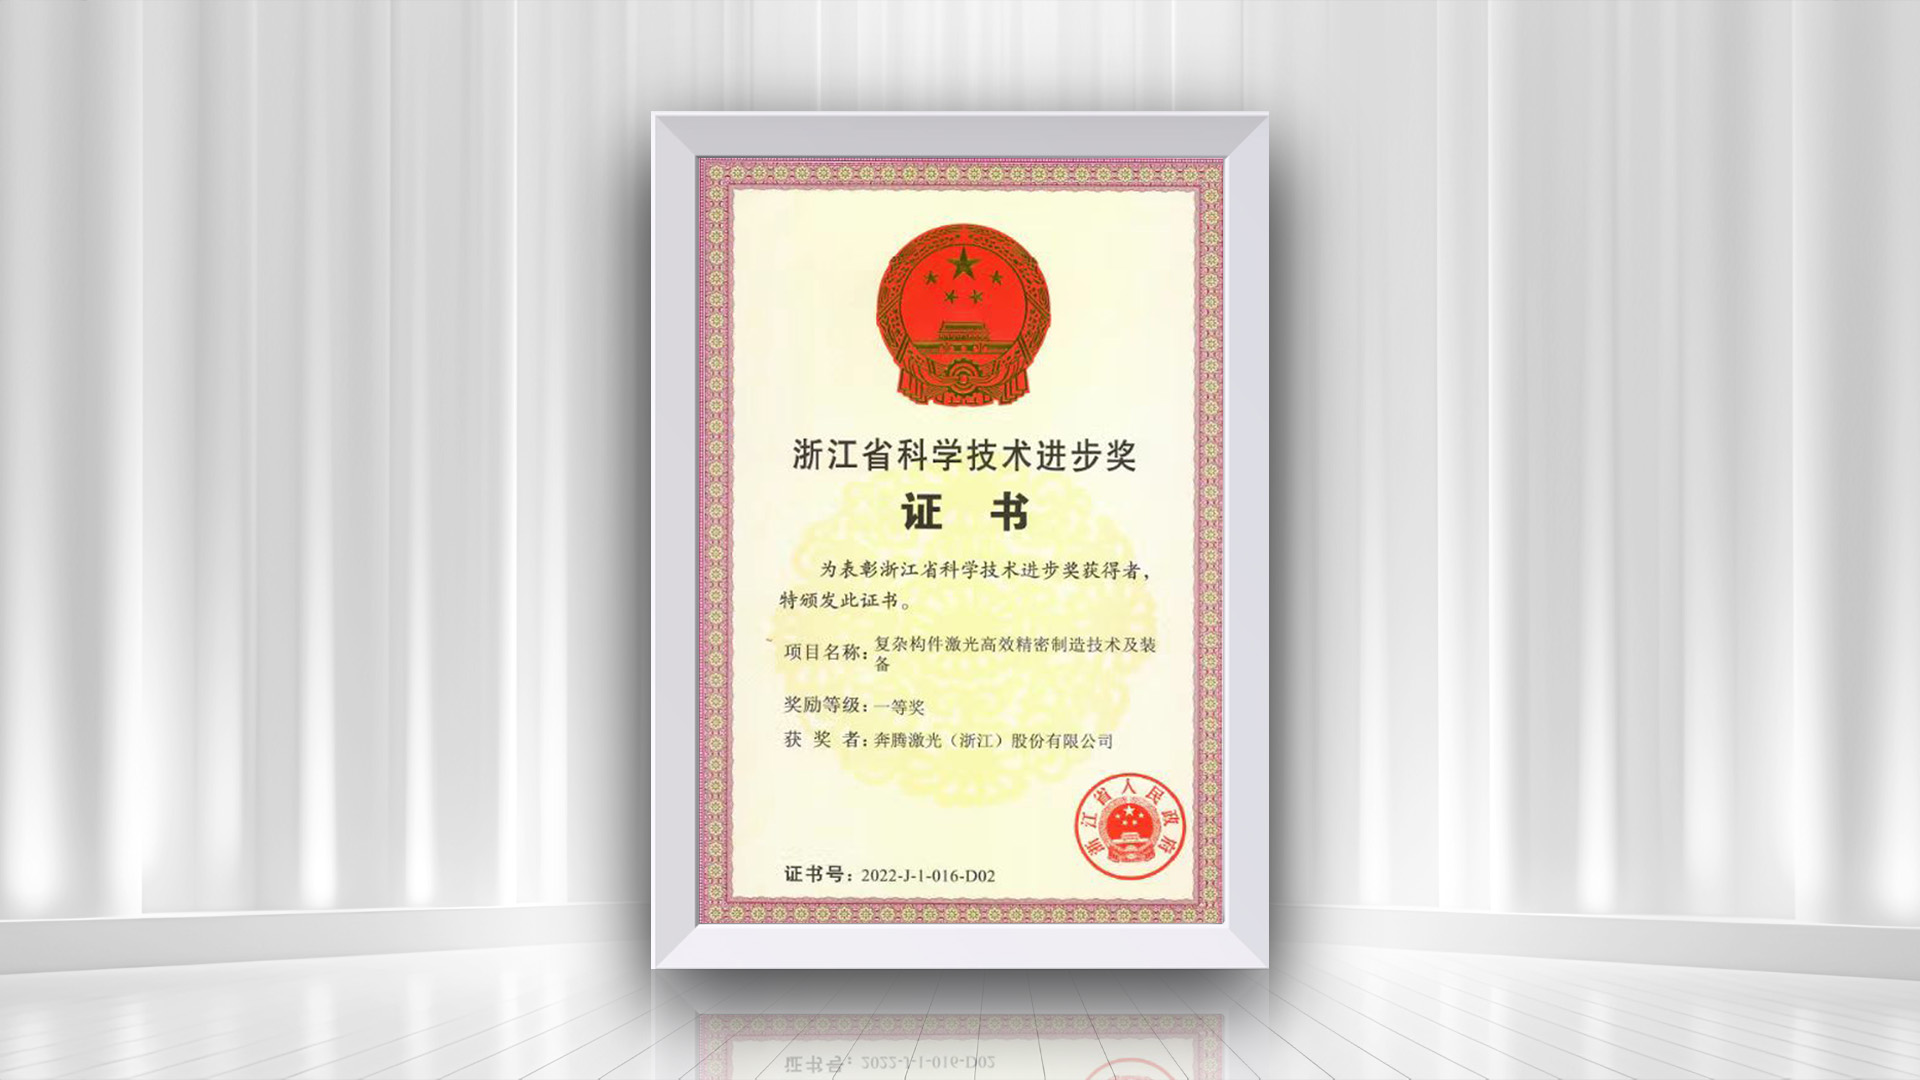 Congratulations to Penta Laser on winning the first prize in the Zhejiang Provincial Science and Technology Progress Award for the 